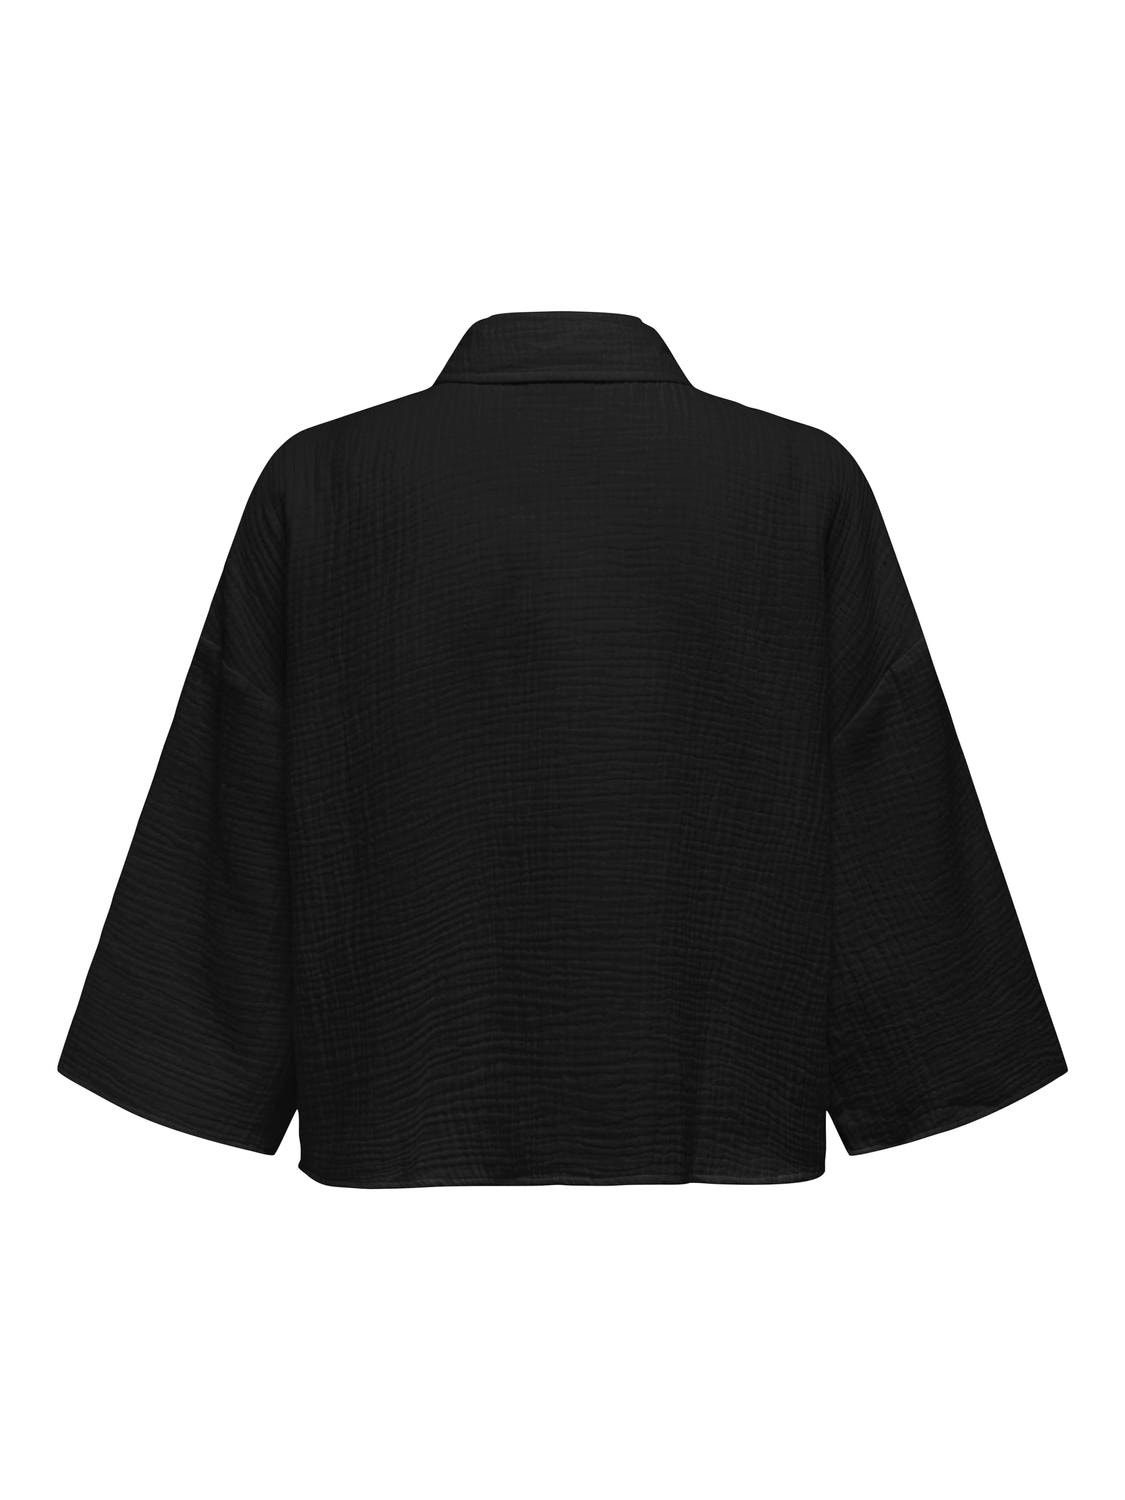 ONLY Wide sleeved shirt -Black - 15307159